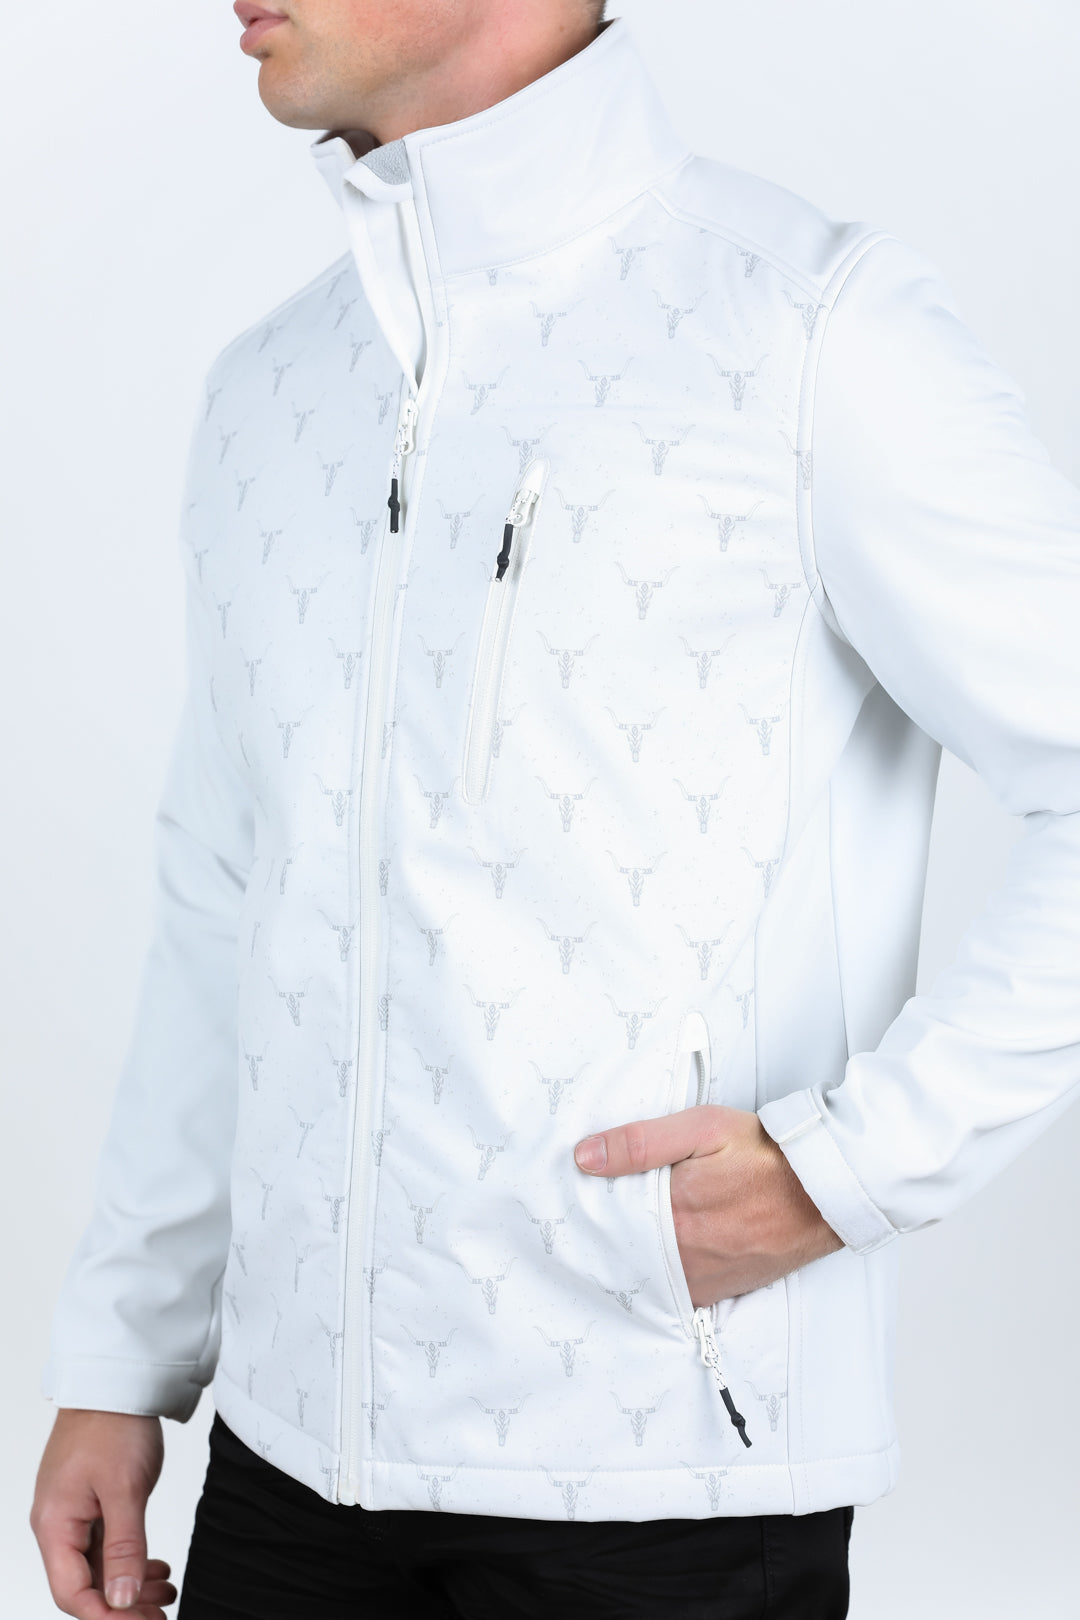 Mens Aztec Softshell Water-Resistant Jacket - White